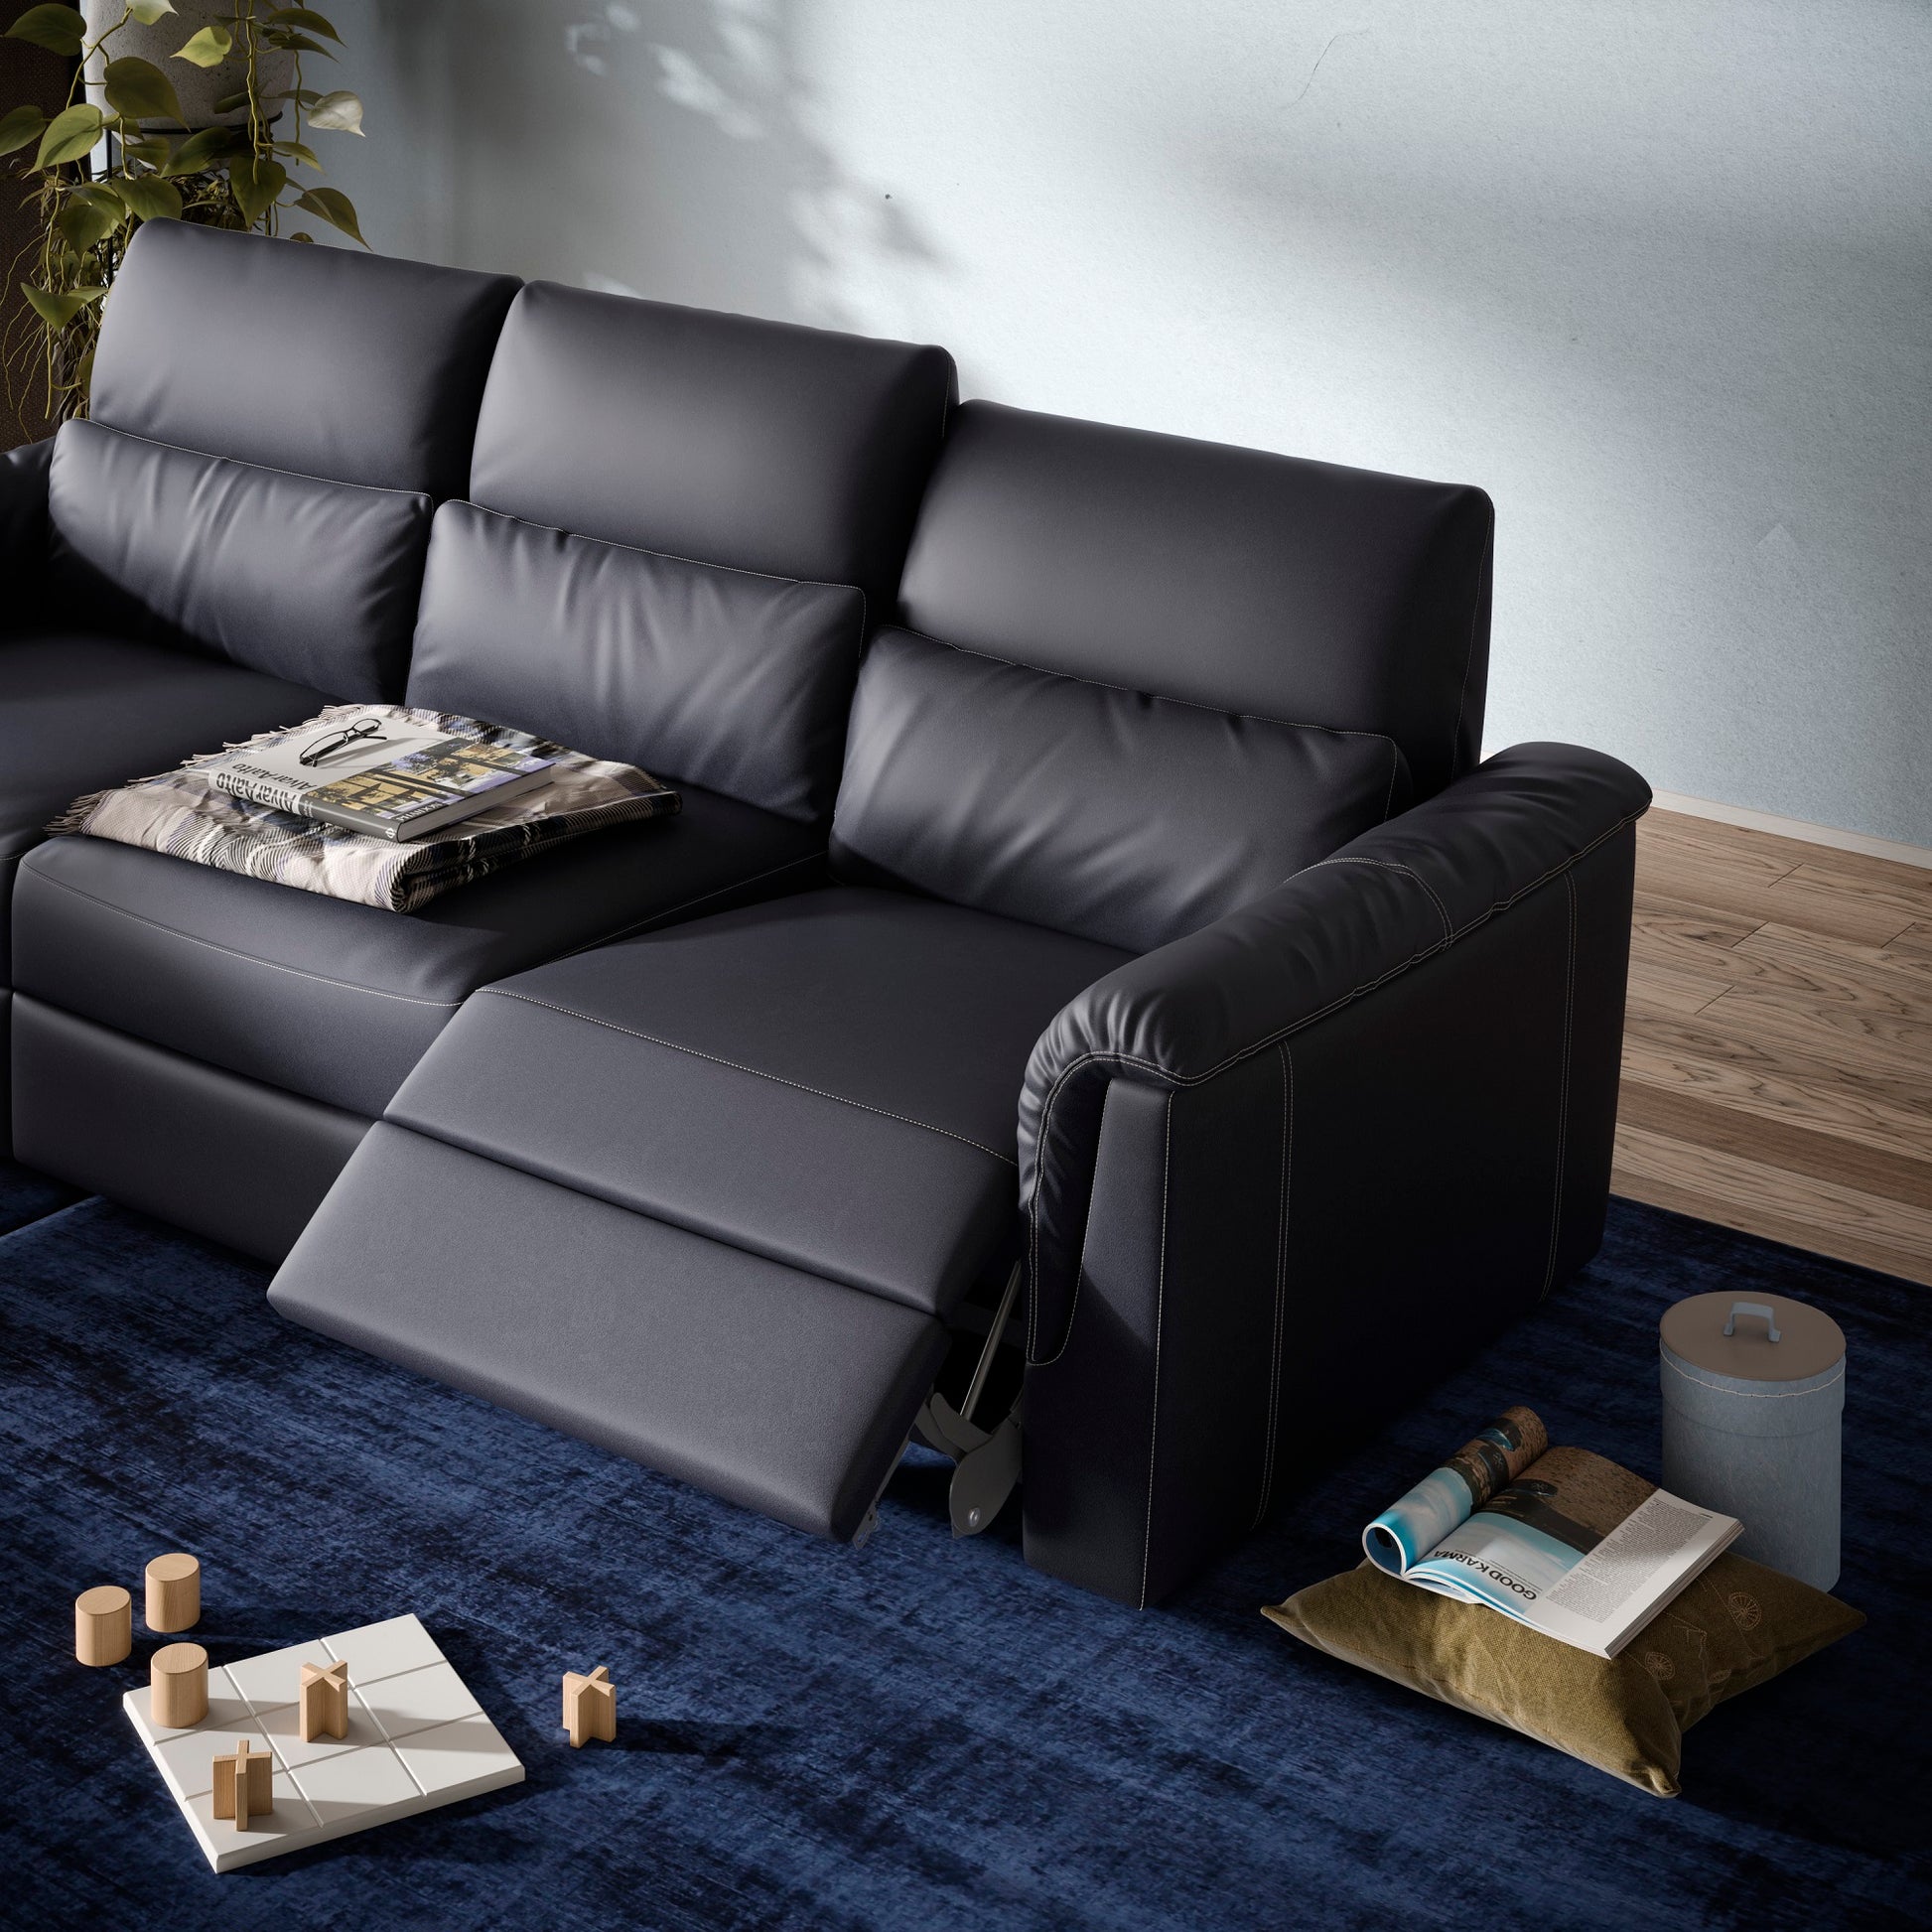 Natuzzi Editions Amorevole C176 Reclining Modular Sofa. Available from your Natuzzi Stockist Make Your House A Home, Bendigo, Victoria. Australia wide delivery to Melbourne. Italian leather.